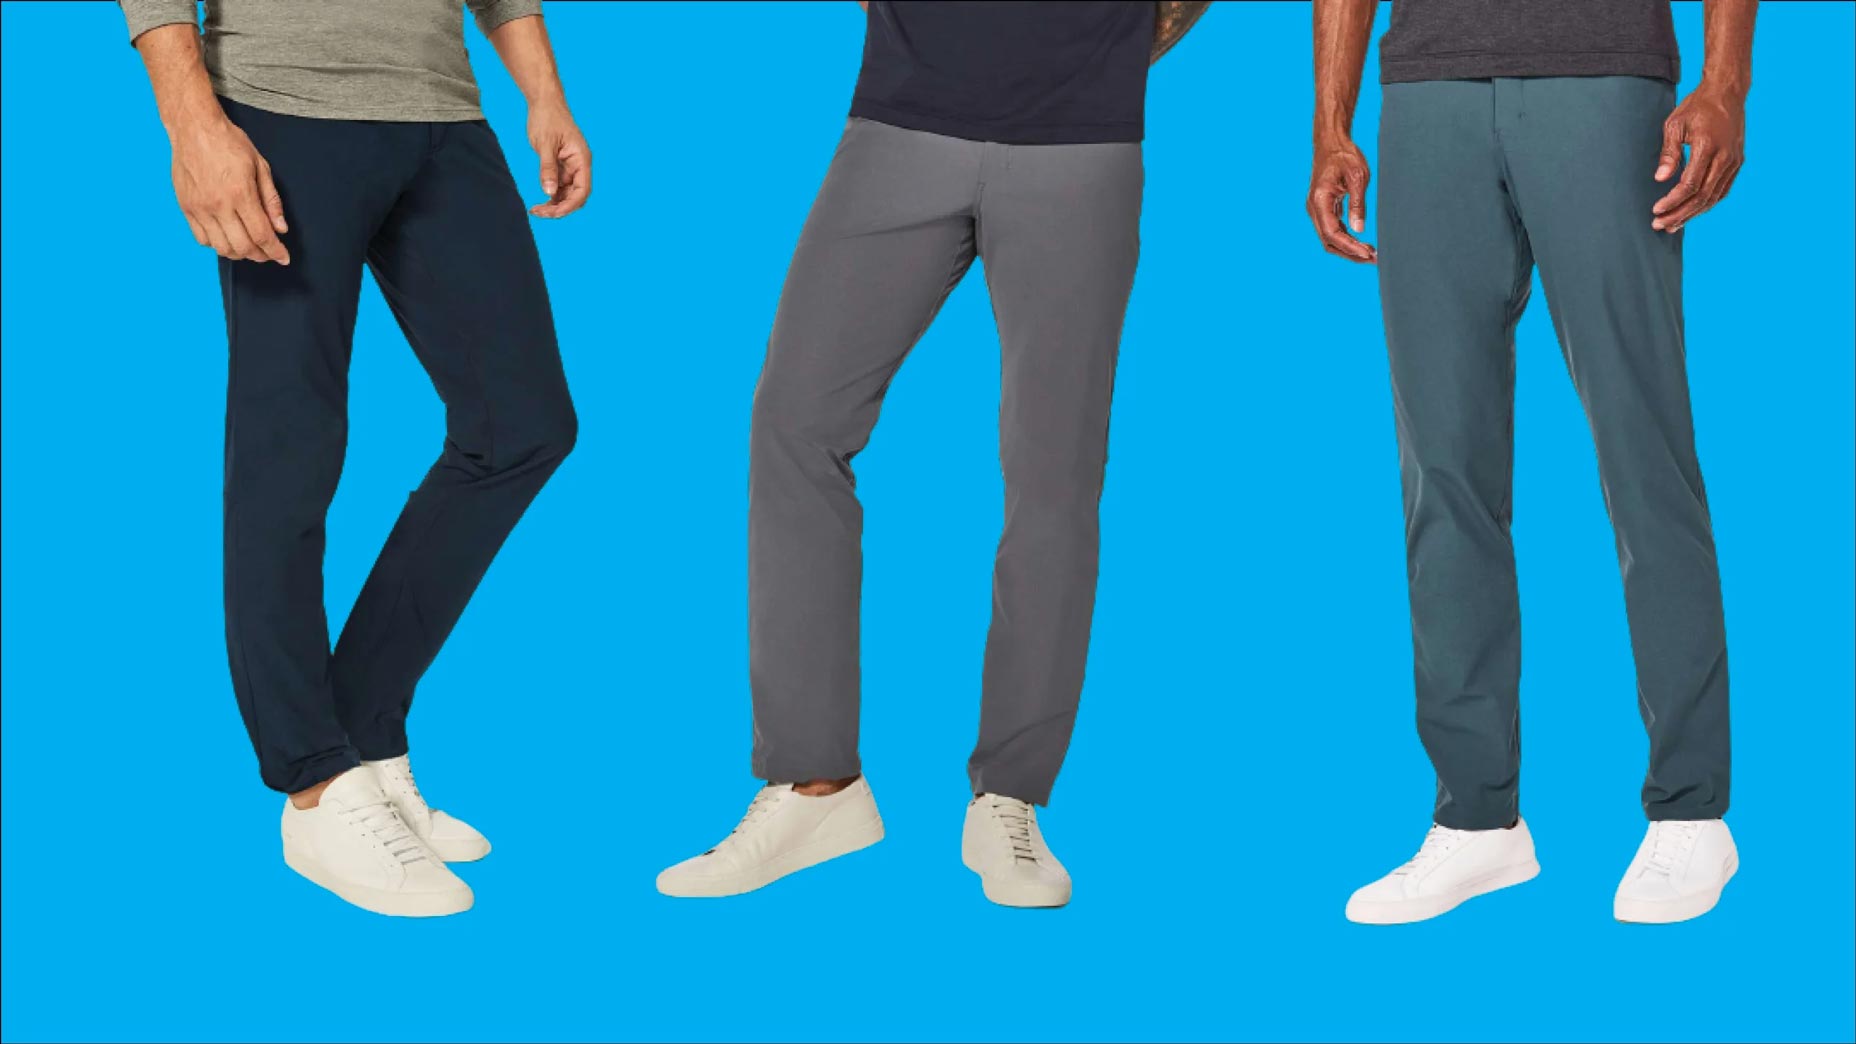 These are the best golf pants I've ever worn: Lululemon ABC